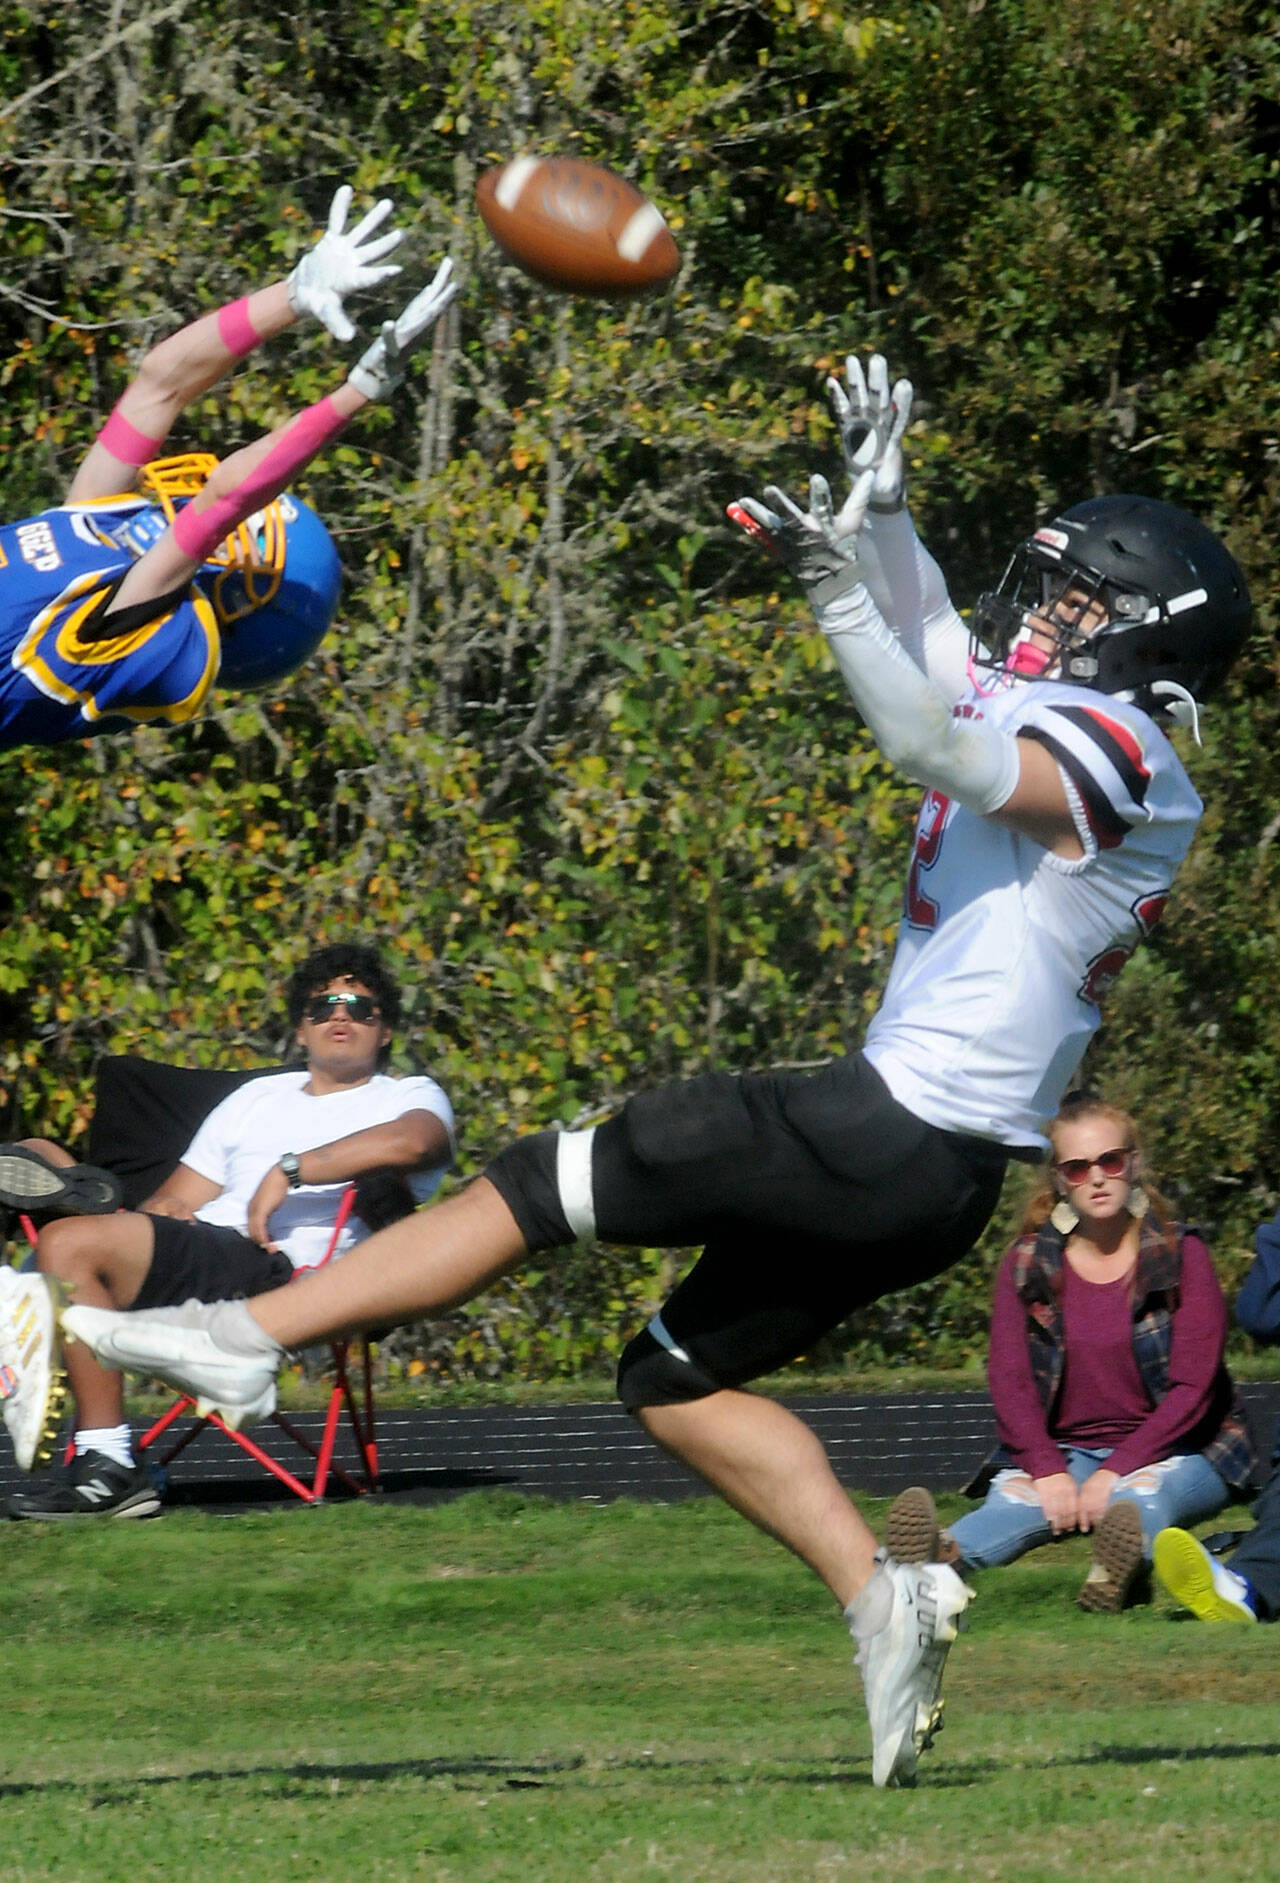 Neah Bay’s Adam Ellis, right, attempts to catch a pass over the head of a Crescent player on Saturday in Joyce. (Keith Thorpe/Peninsula Daily News)